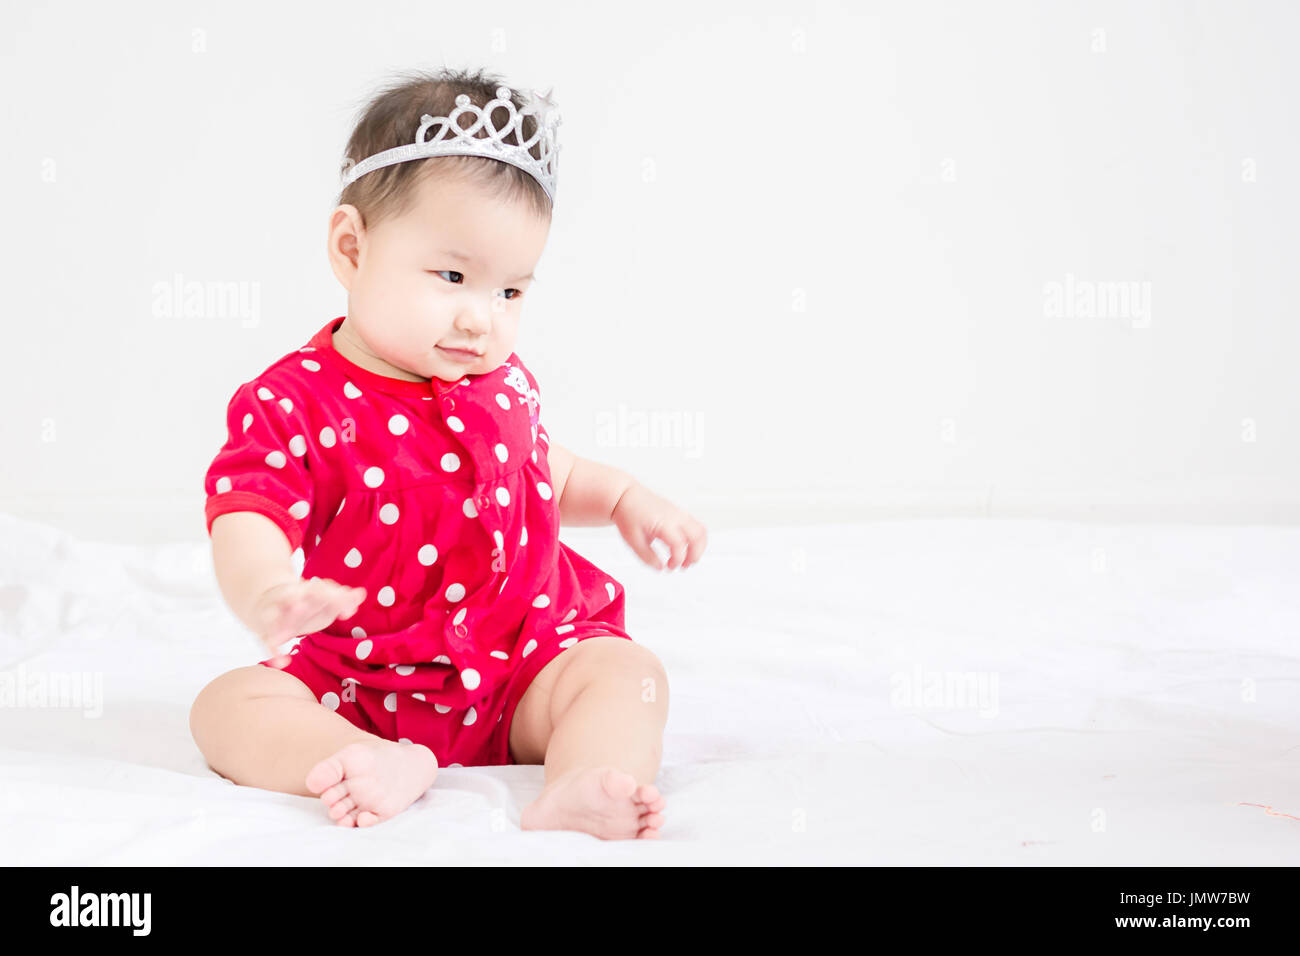 Portrait of a little adorable infant baby girl sitting on the bed with ...